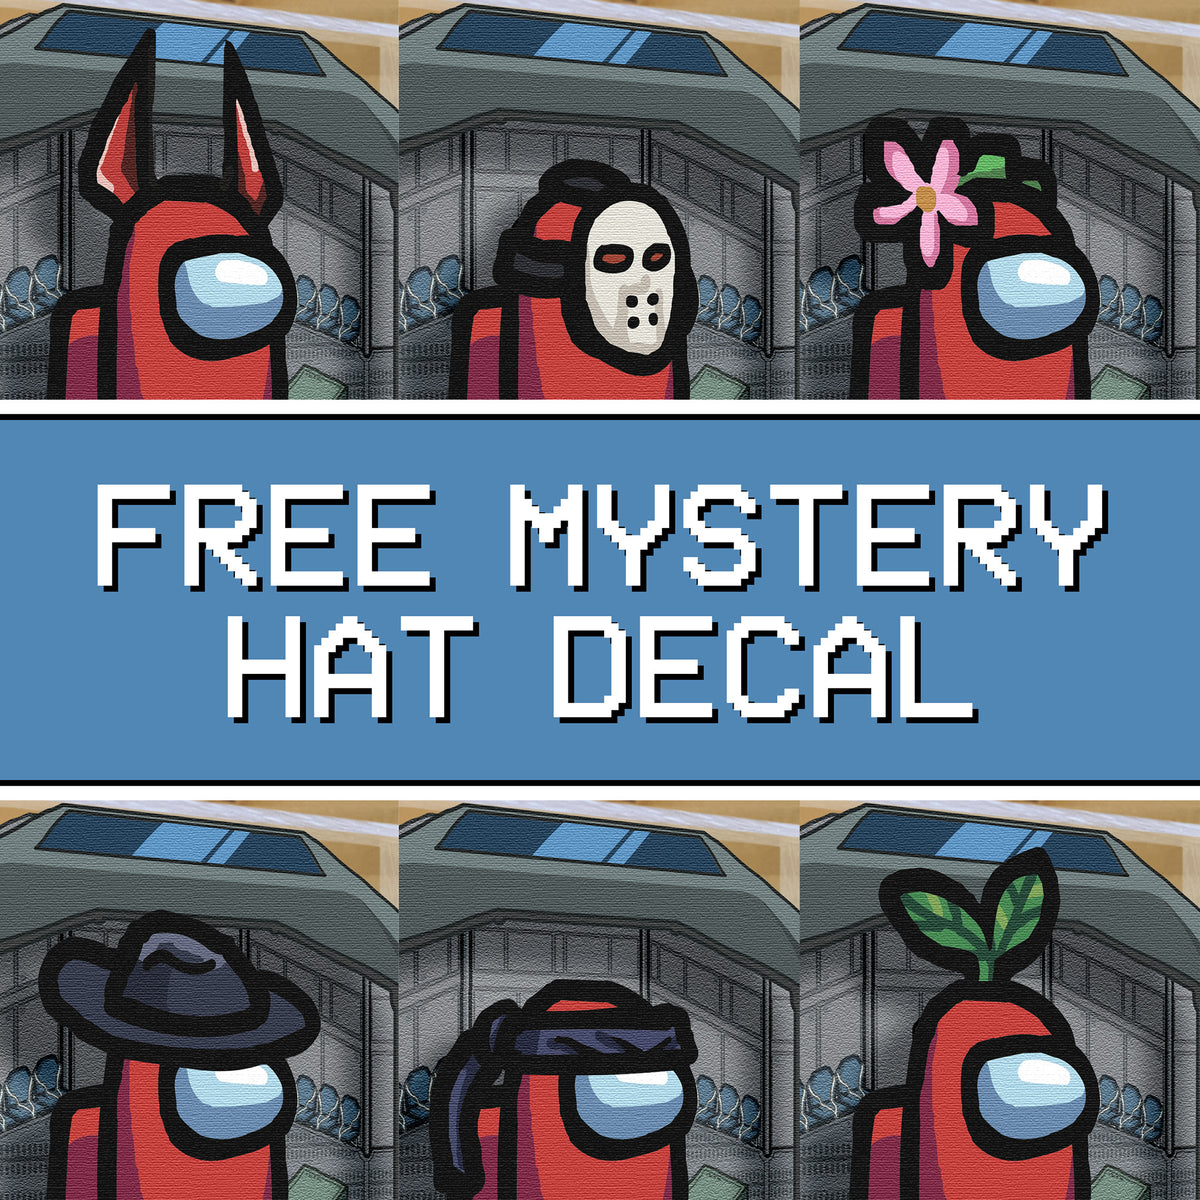 A promo series of photographs showing which “FREE MYSTERY HAT DECAL” you could receive in the box. The choices are devil horns, hockey mask, pink flower, fedora, headband, and sprout.